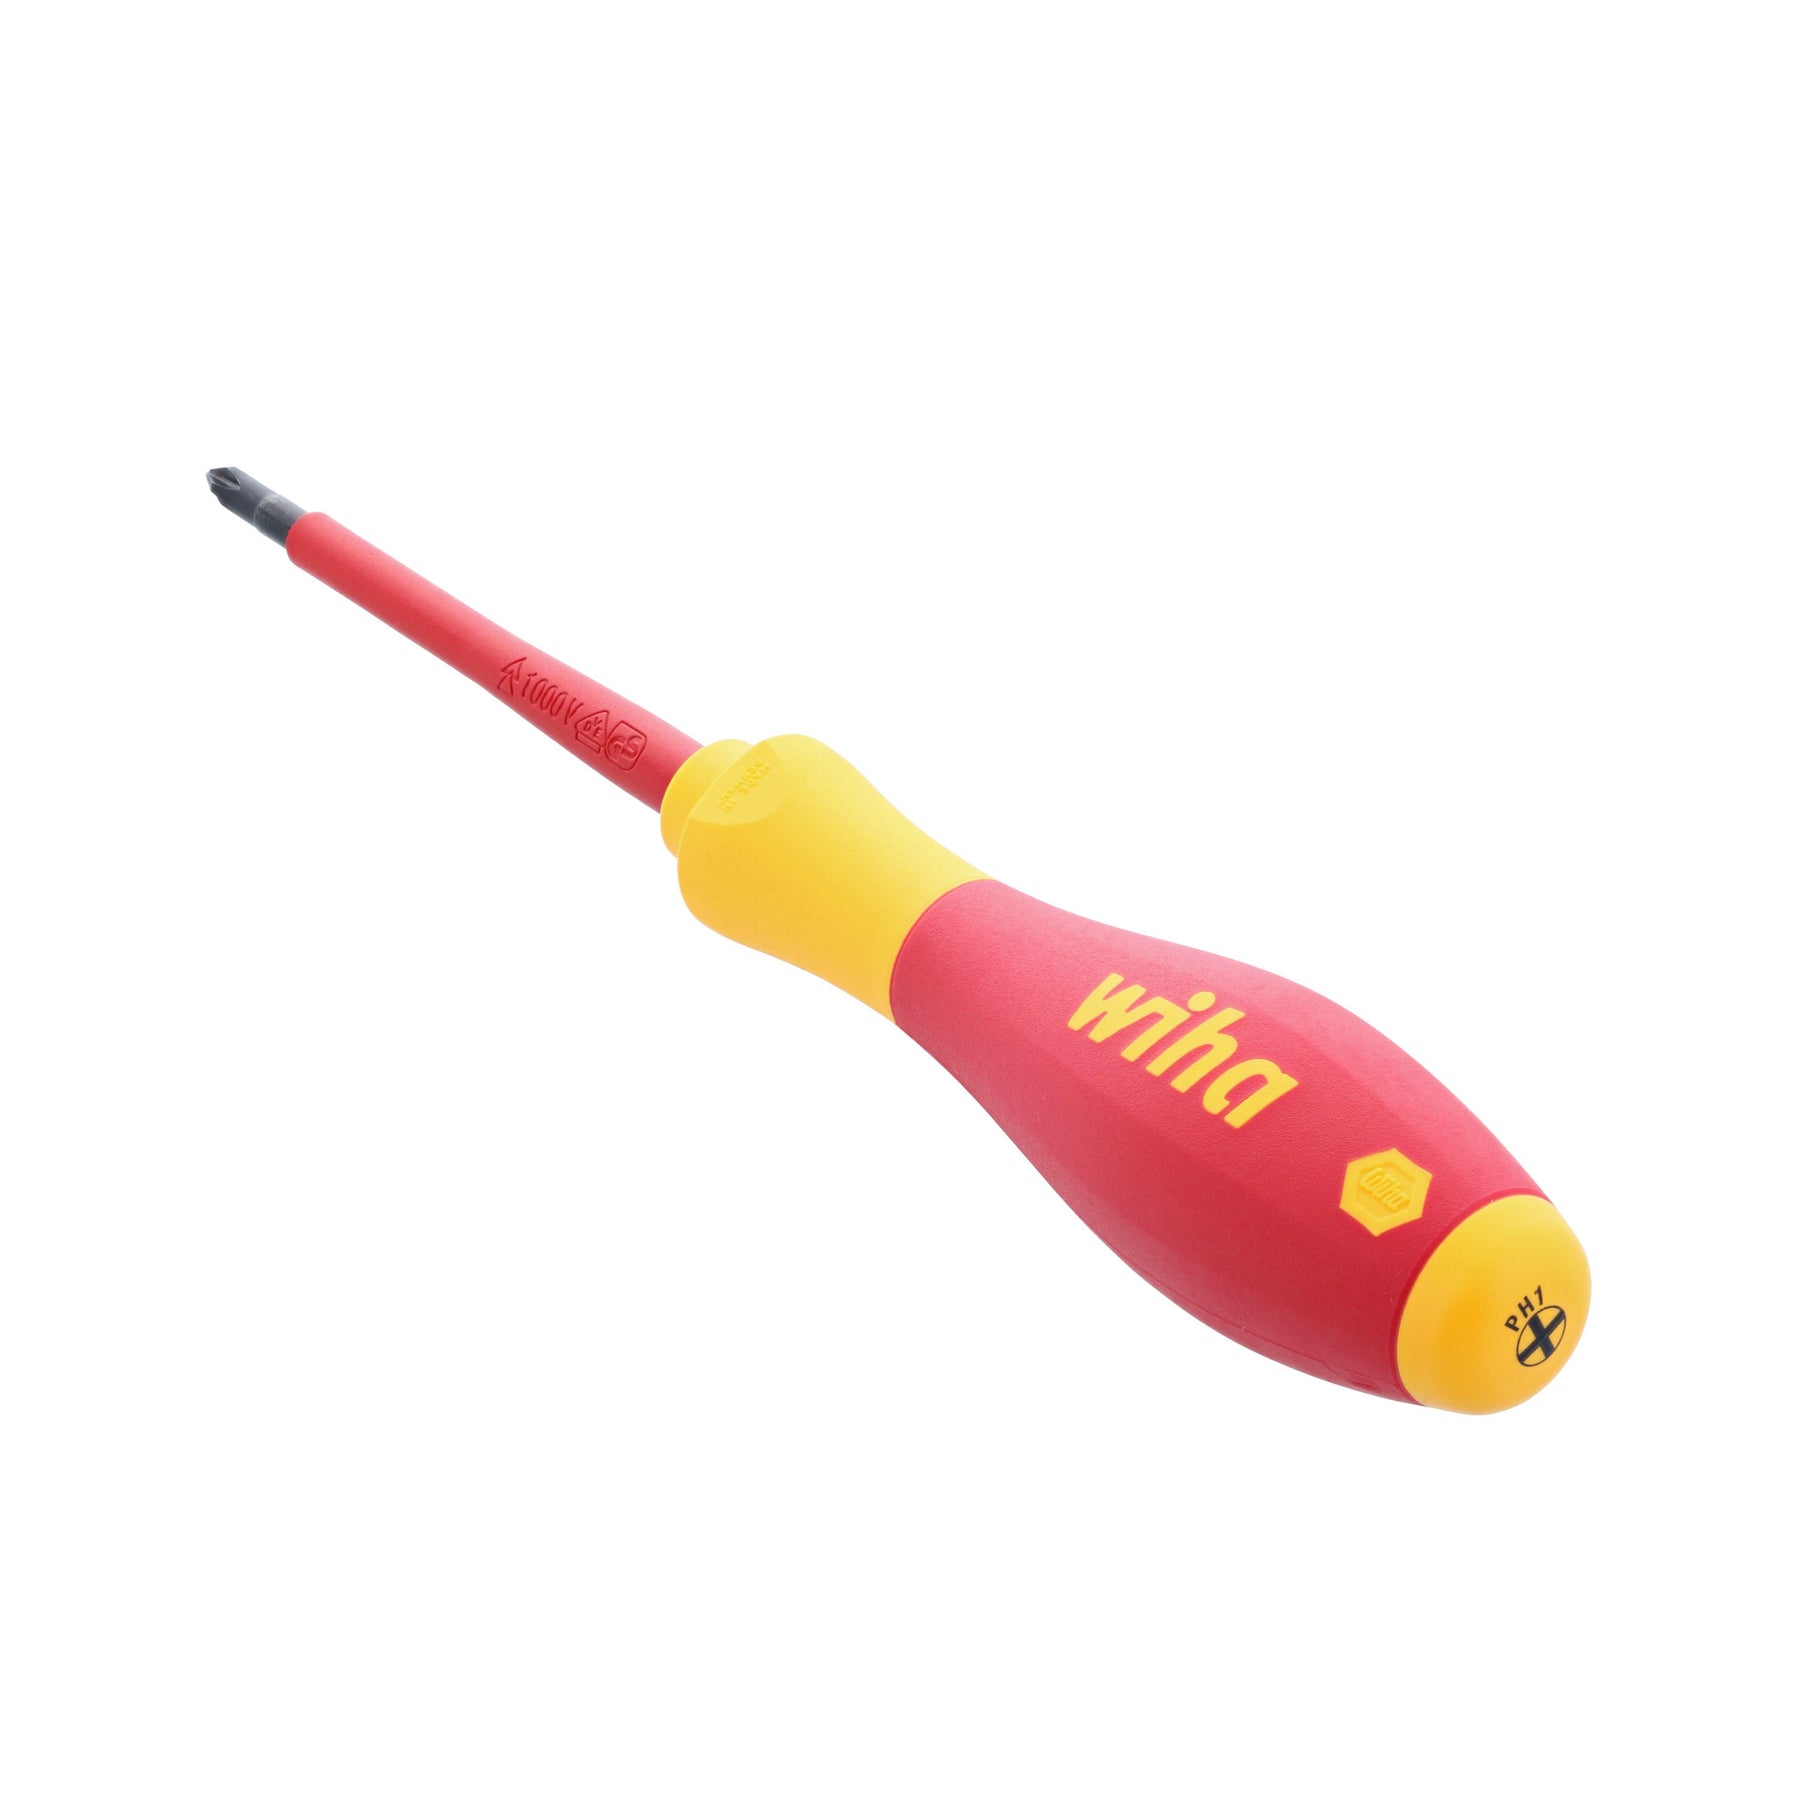 Insulated SoftFinish Phillips Screwdriver #1 x 80mm